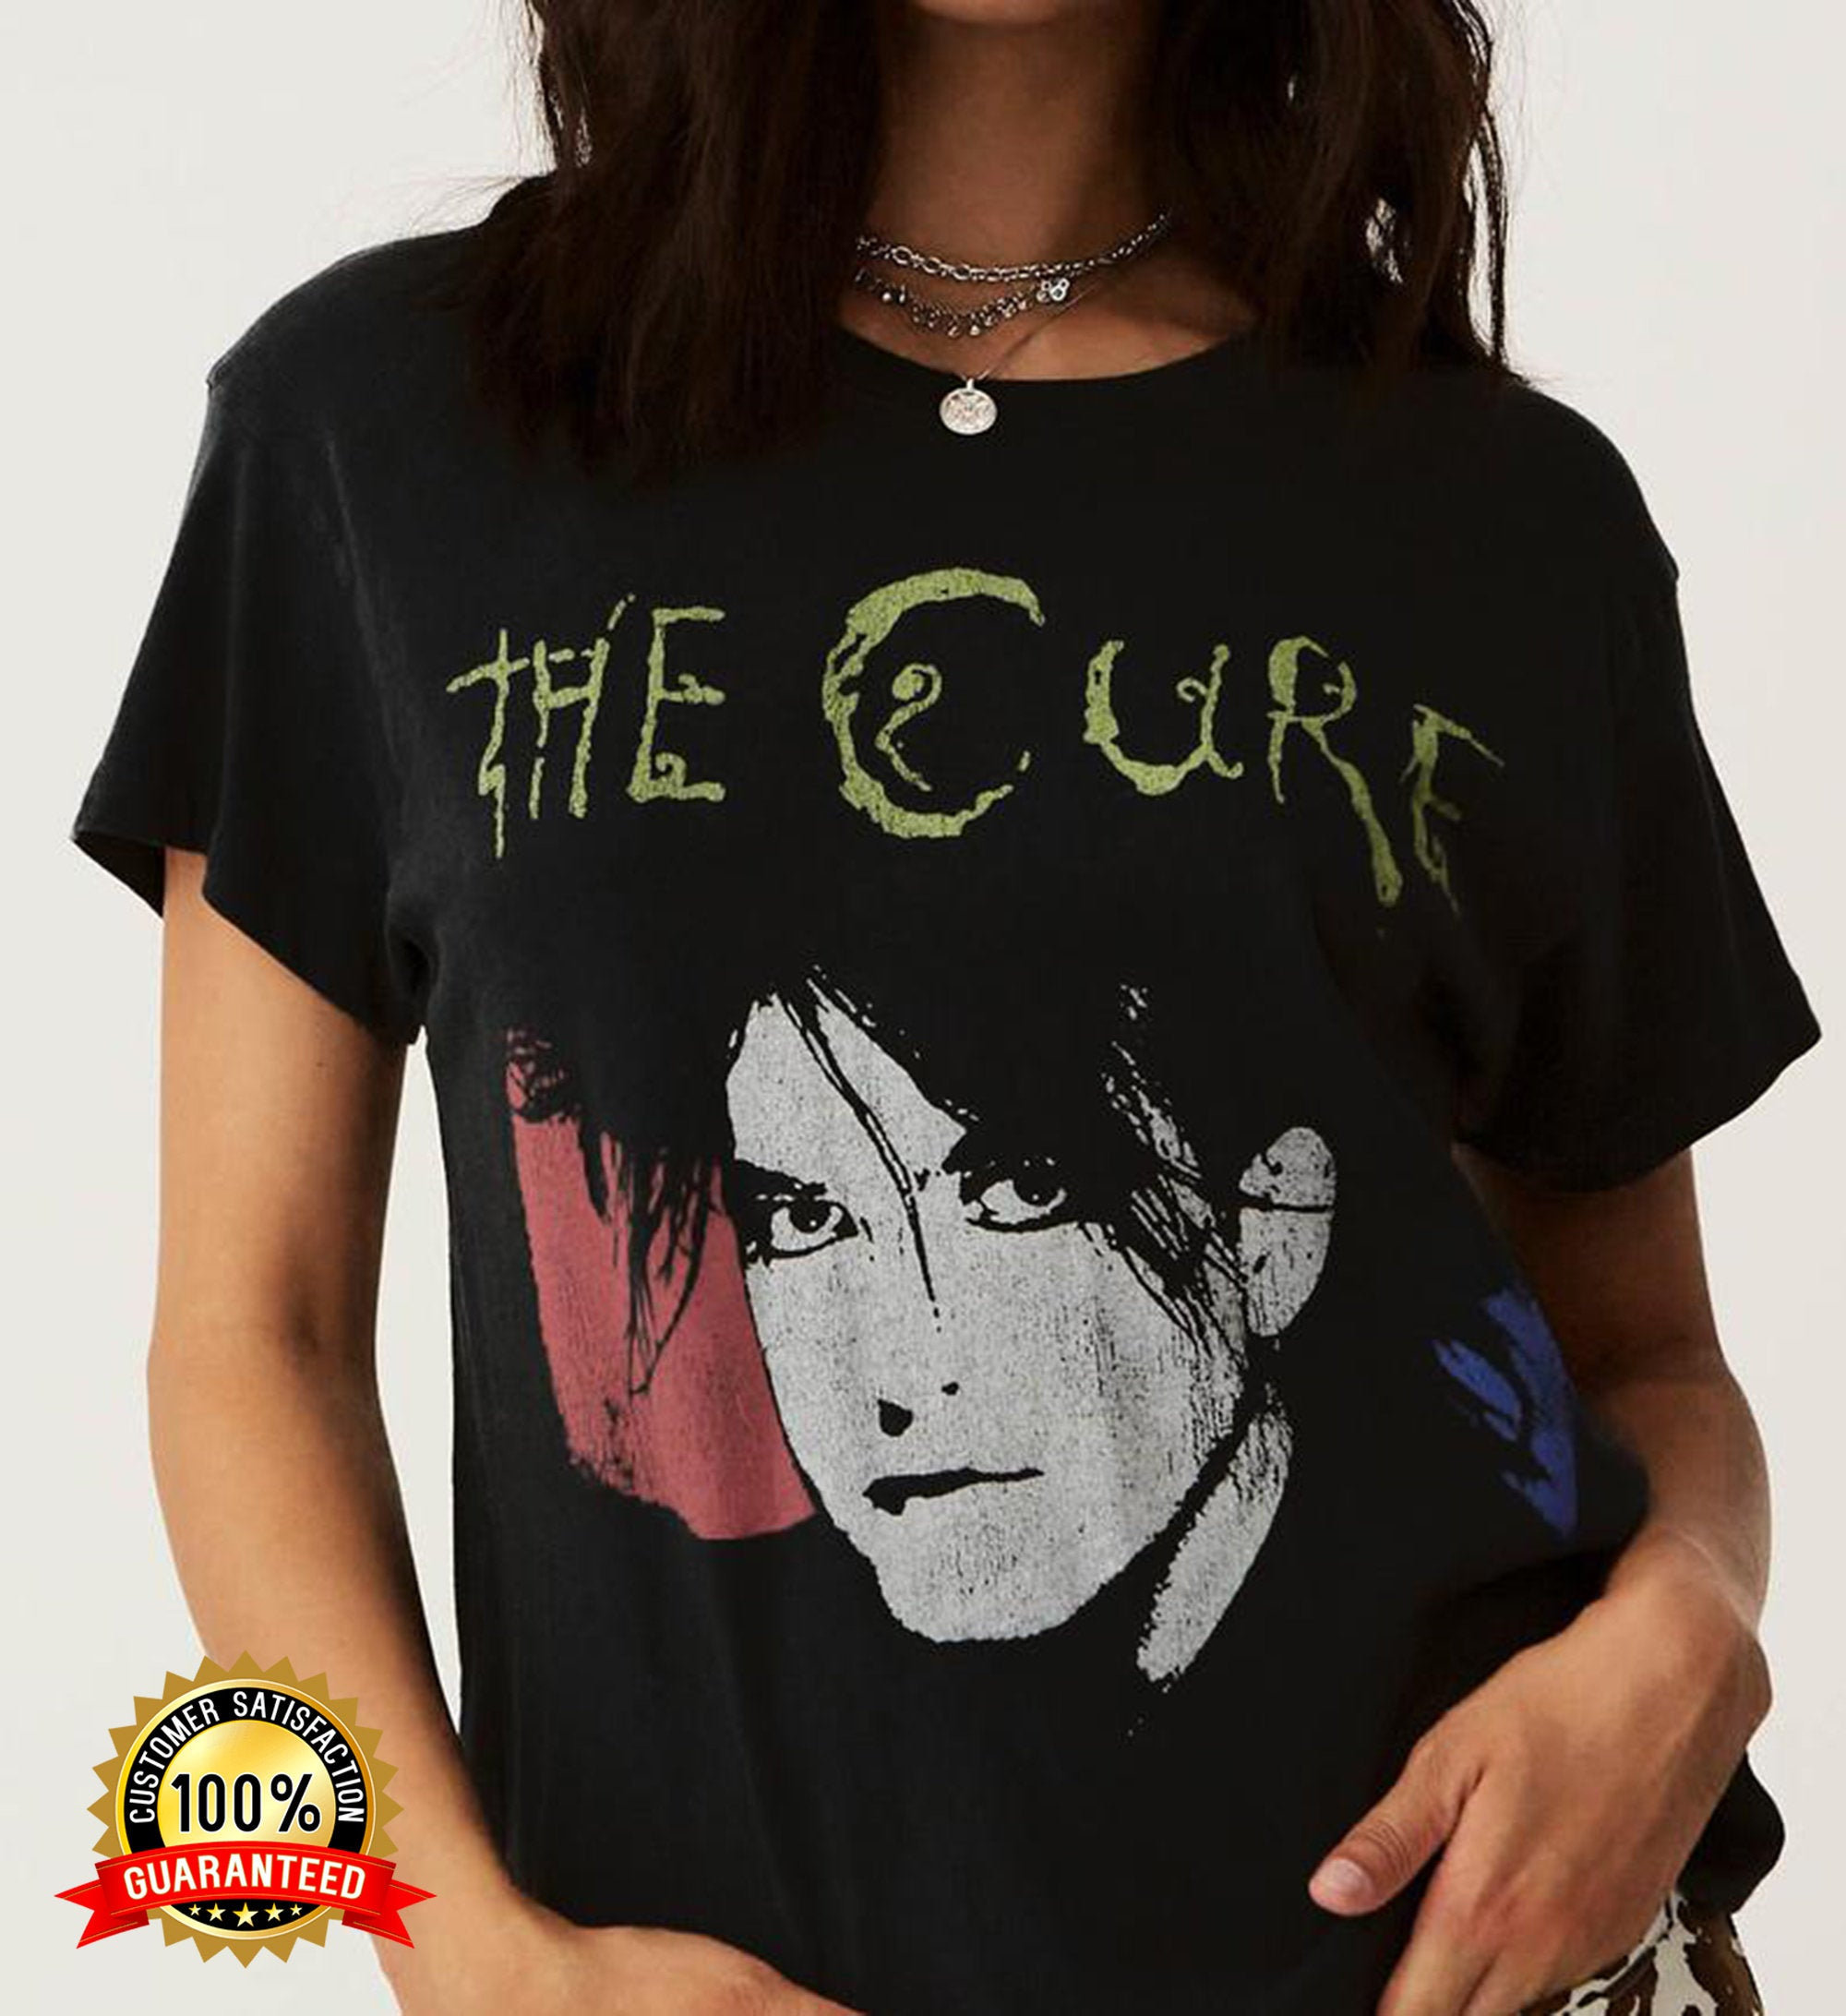 The Cure Another Day Tour Shirt,Vintage The Cure Shirt